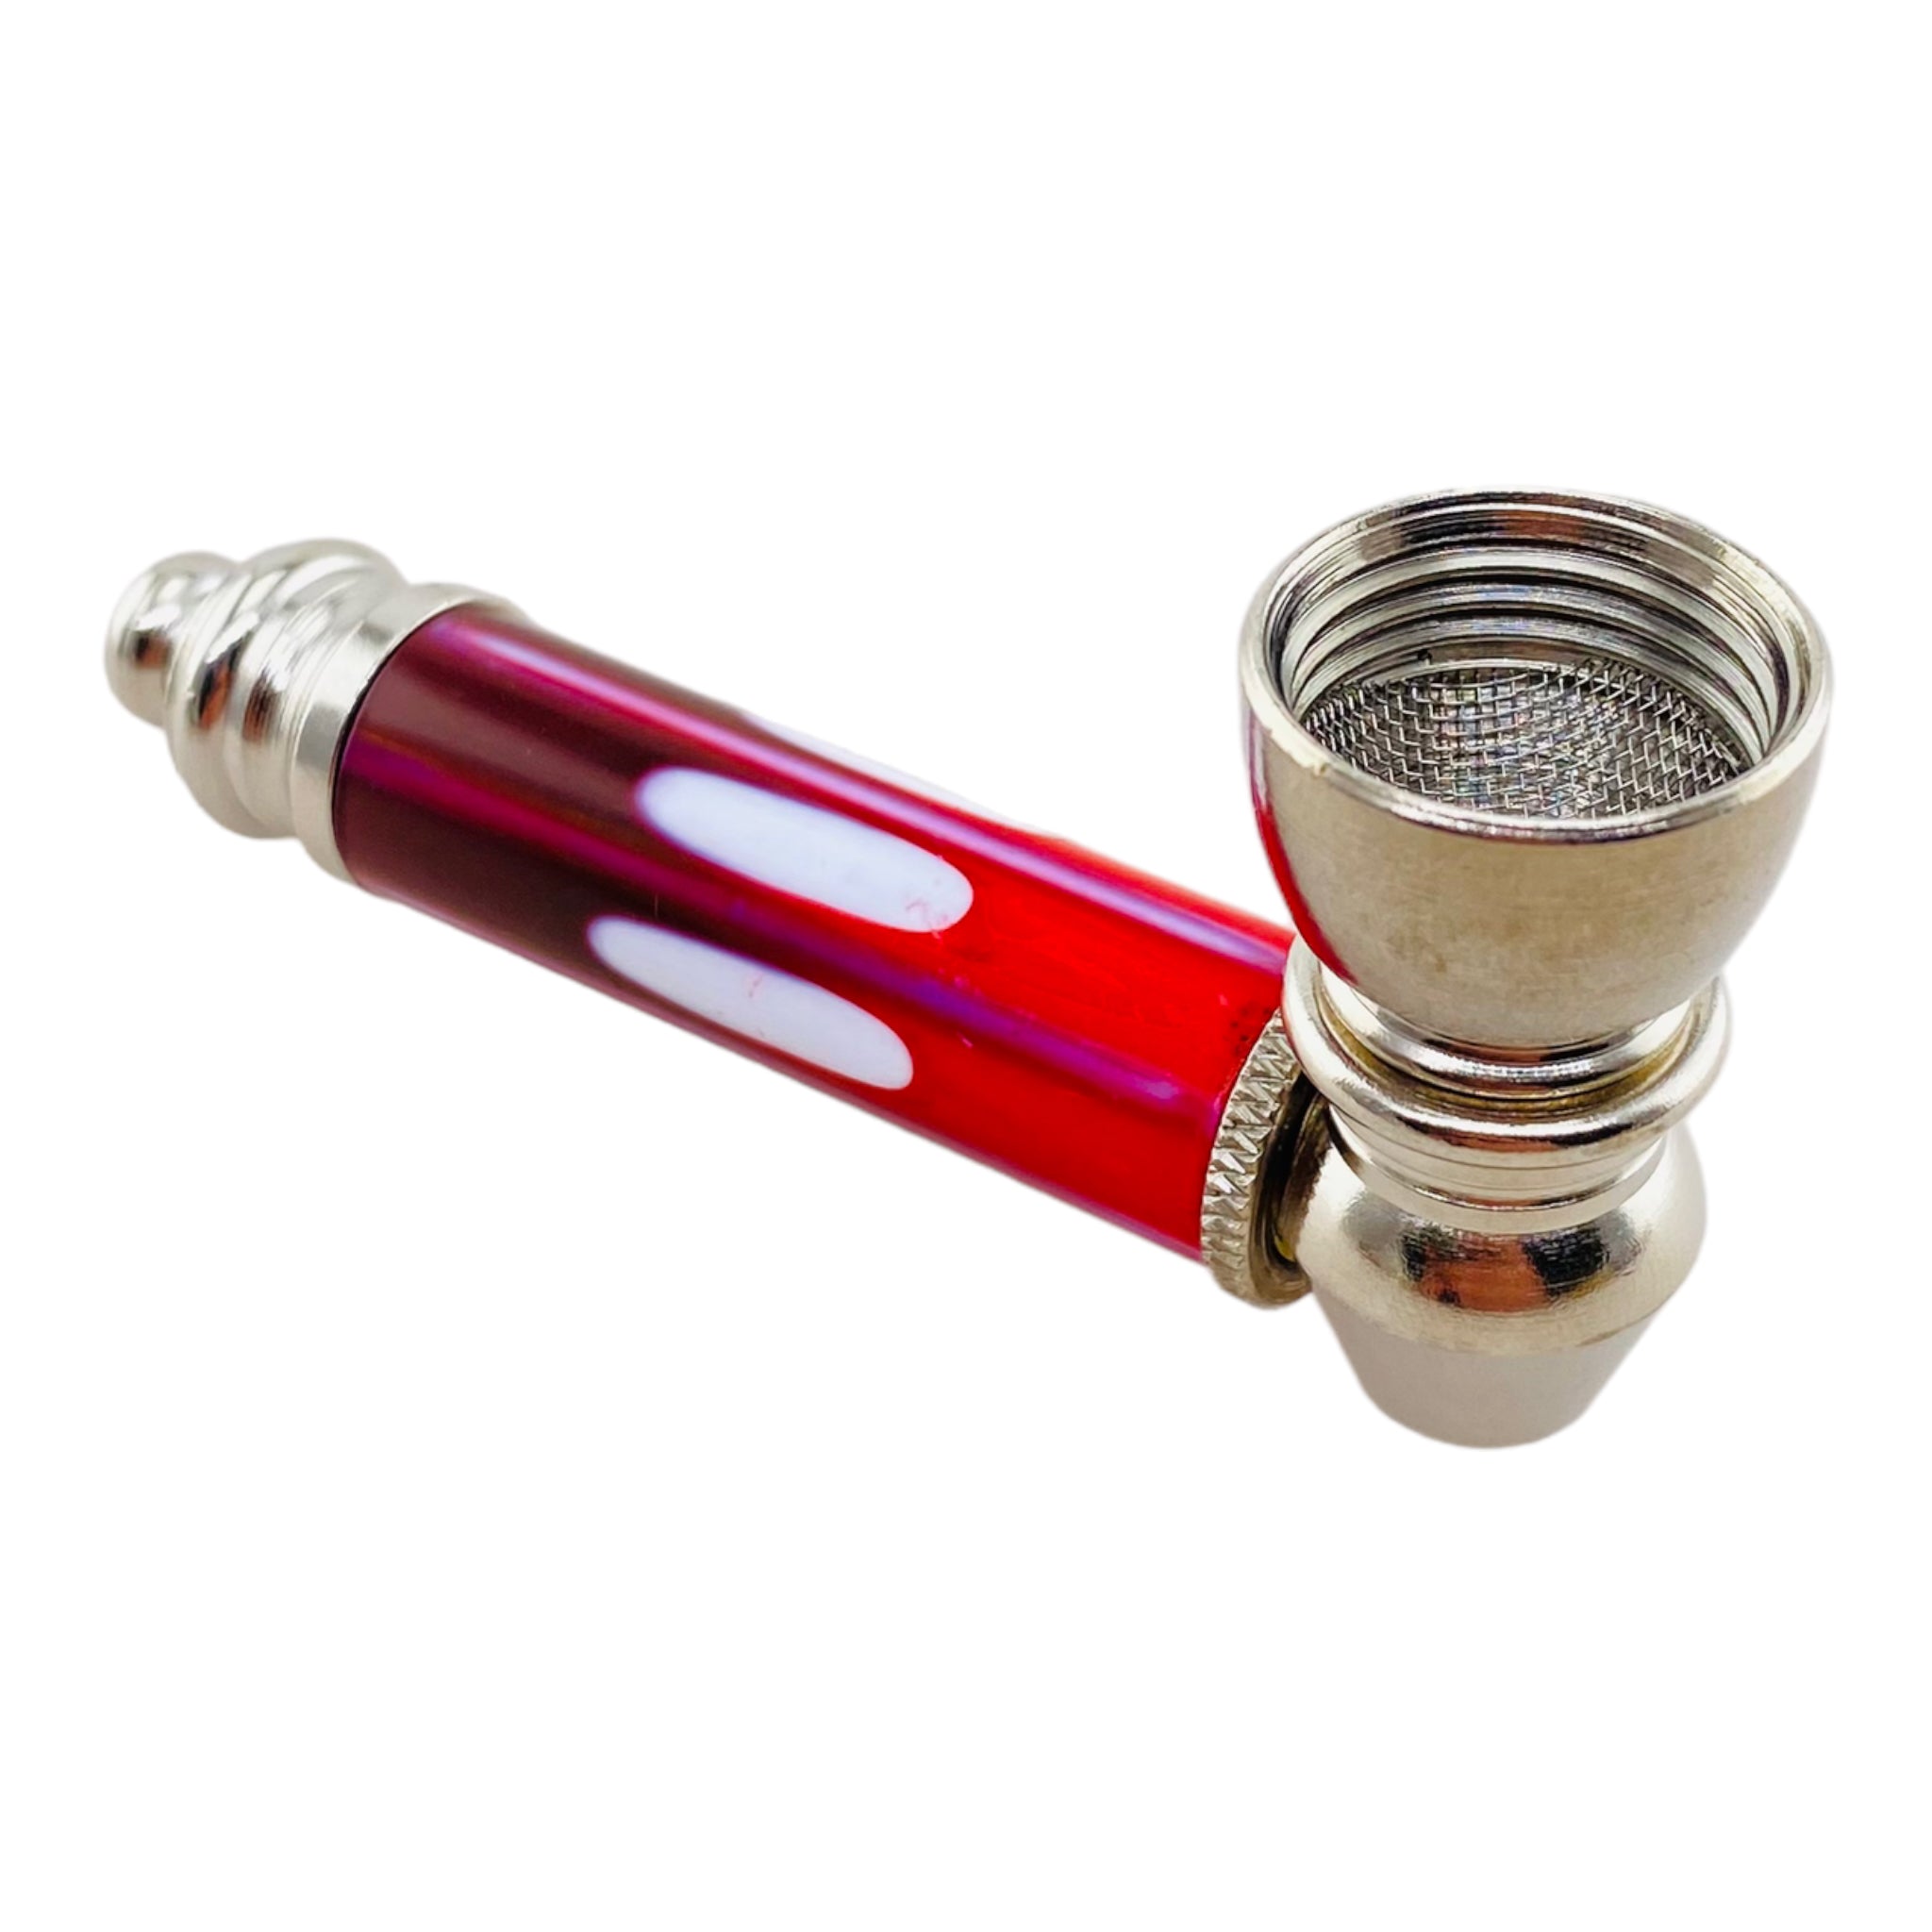 Metal Hand Pipes - Silver Chrome Hand Pipe With Decorative Red Plastic Stem